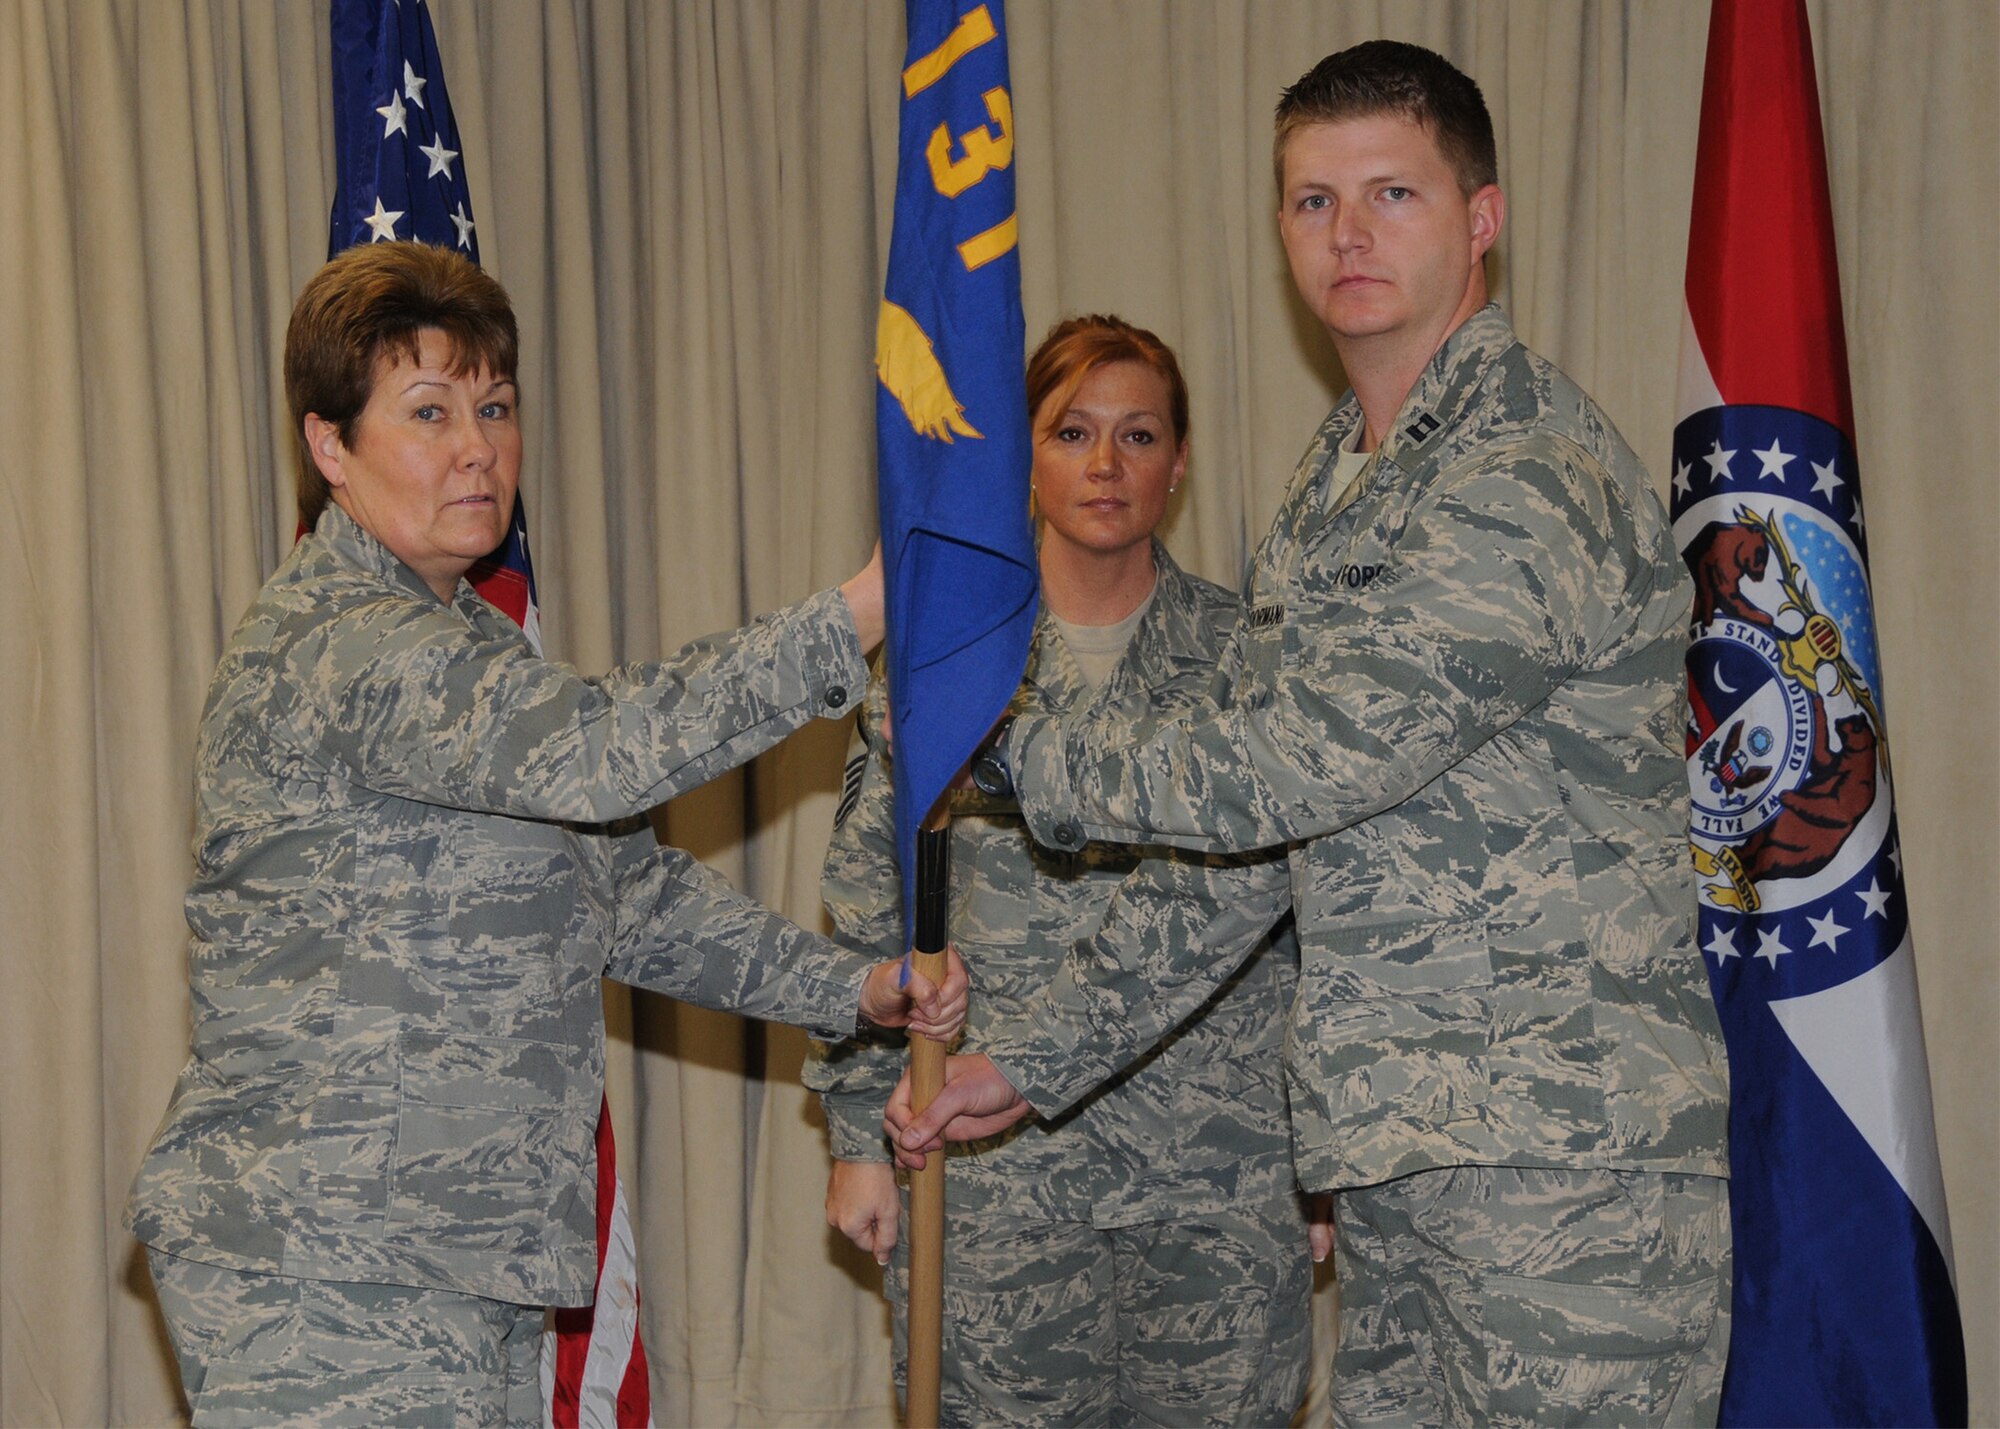 Capt. Joshua Hoormann accepts the 131st Communications Flight, guidon from Col. Terri Chaney, 131st Mission Support Group commander, during a change of command ceremony held at the Base Community Center, Lambert ANGB, March 21.  (U.S. Air Force photo by Master Sgt. Mary-Dale Amison  RELEASED)